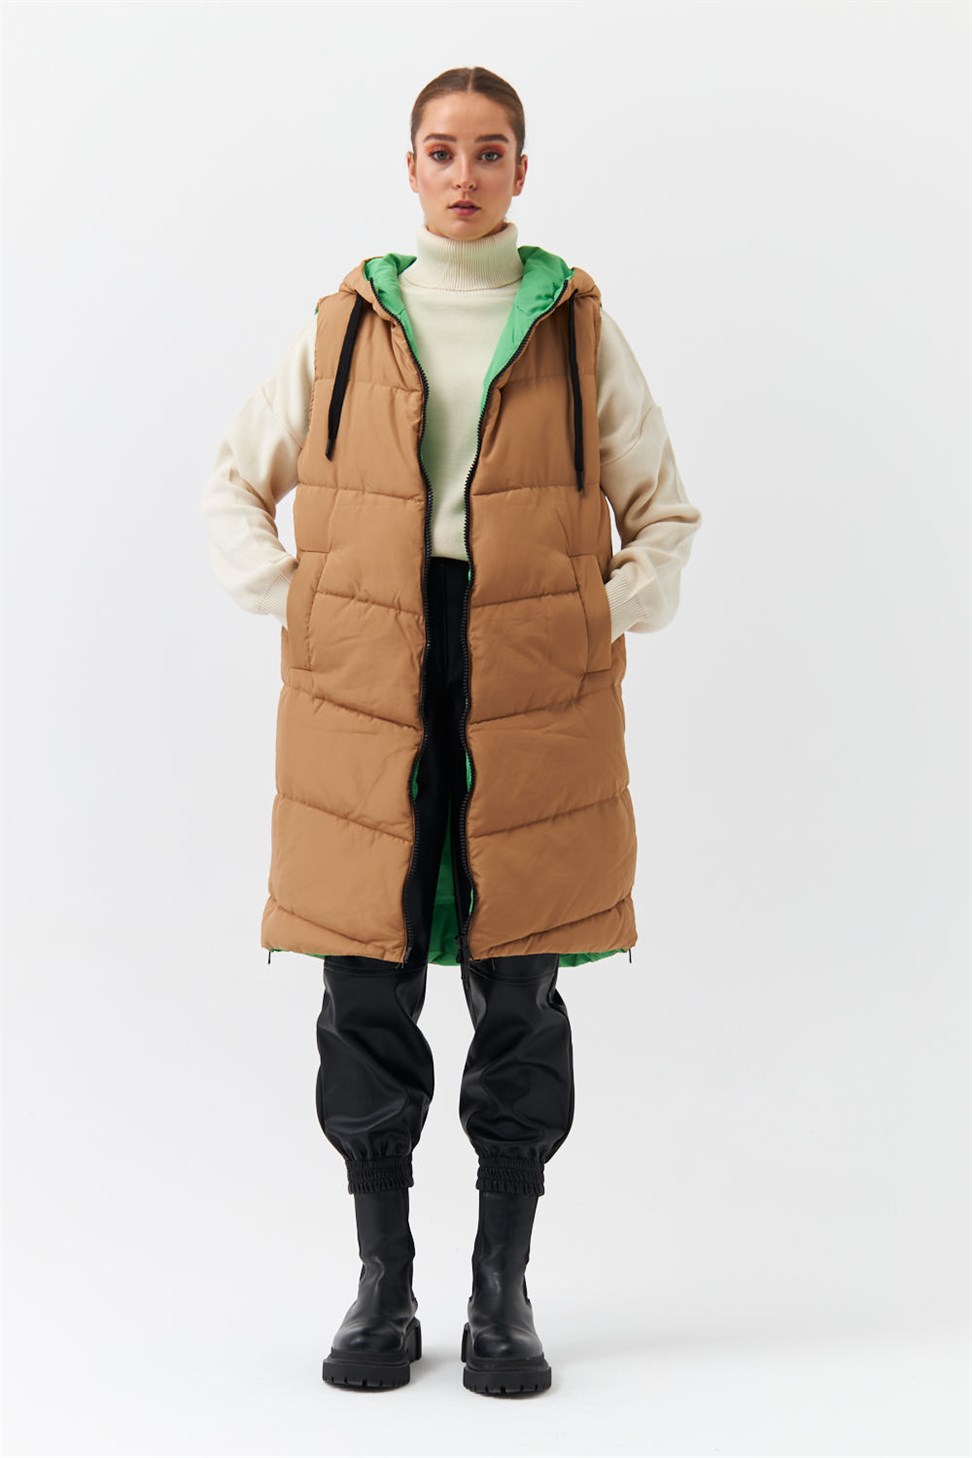 Modest Hooded Green Womens Inflatable Vest